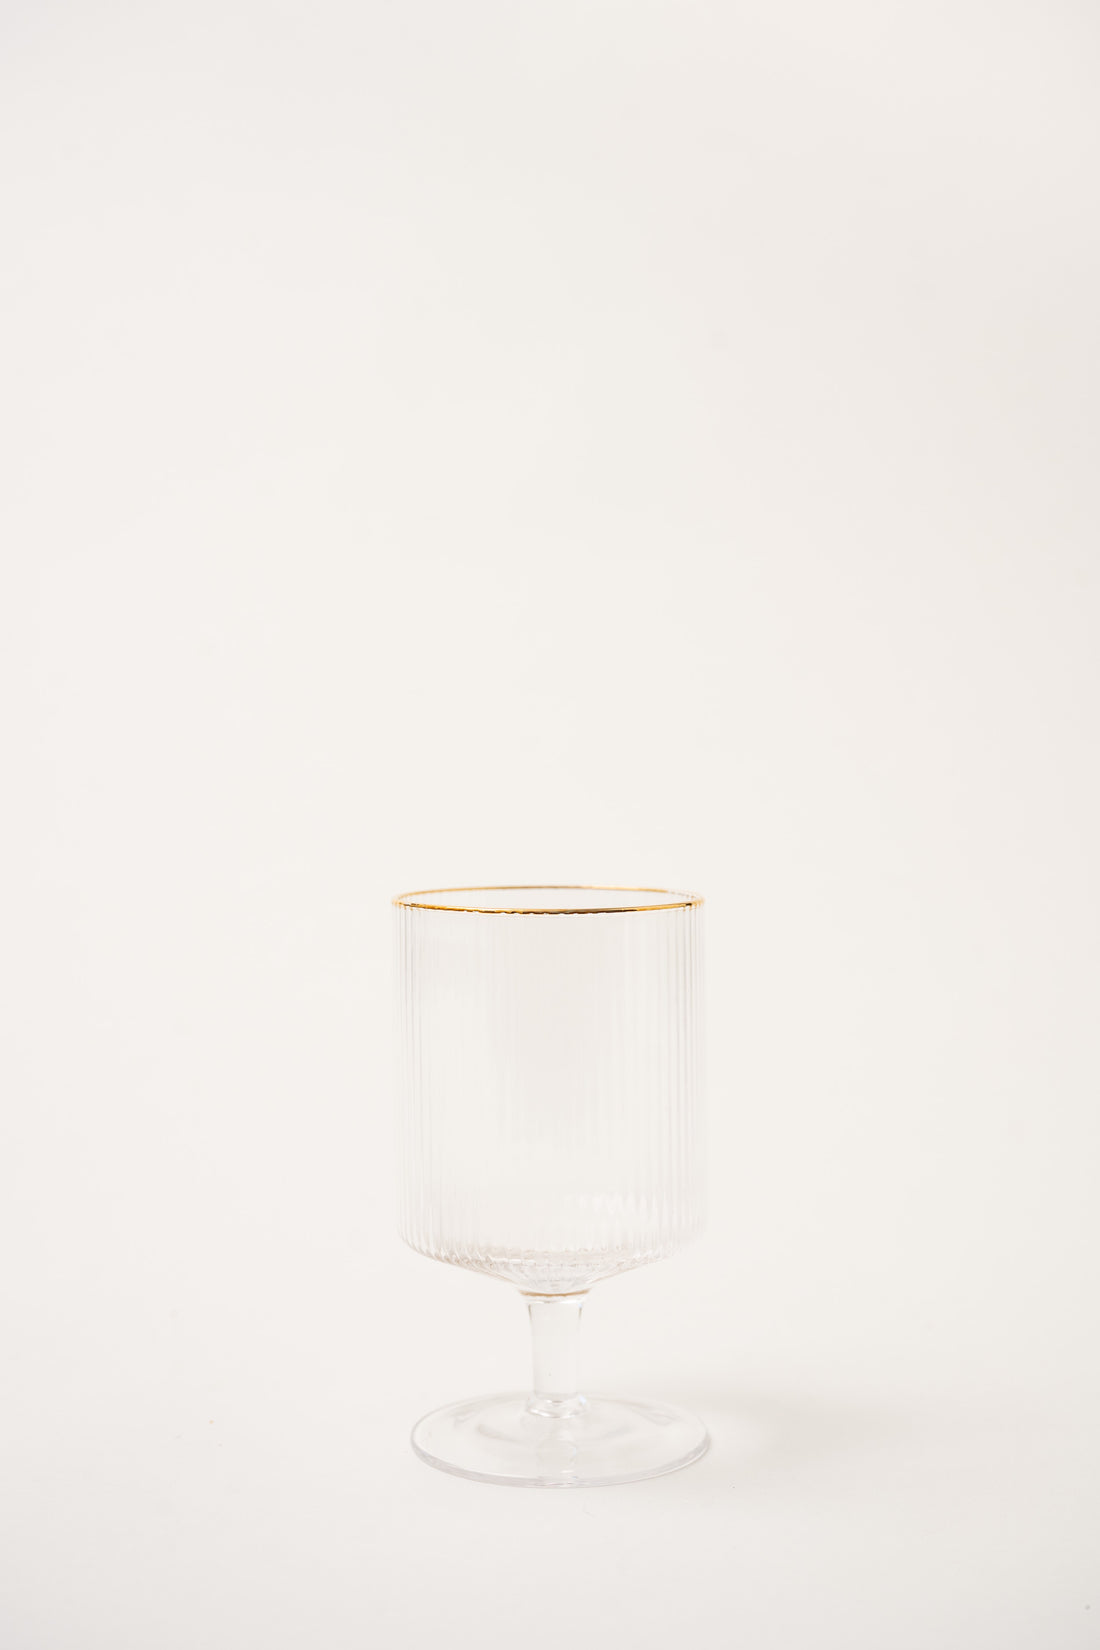 Footed Cocktail Glass - Gold Rim